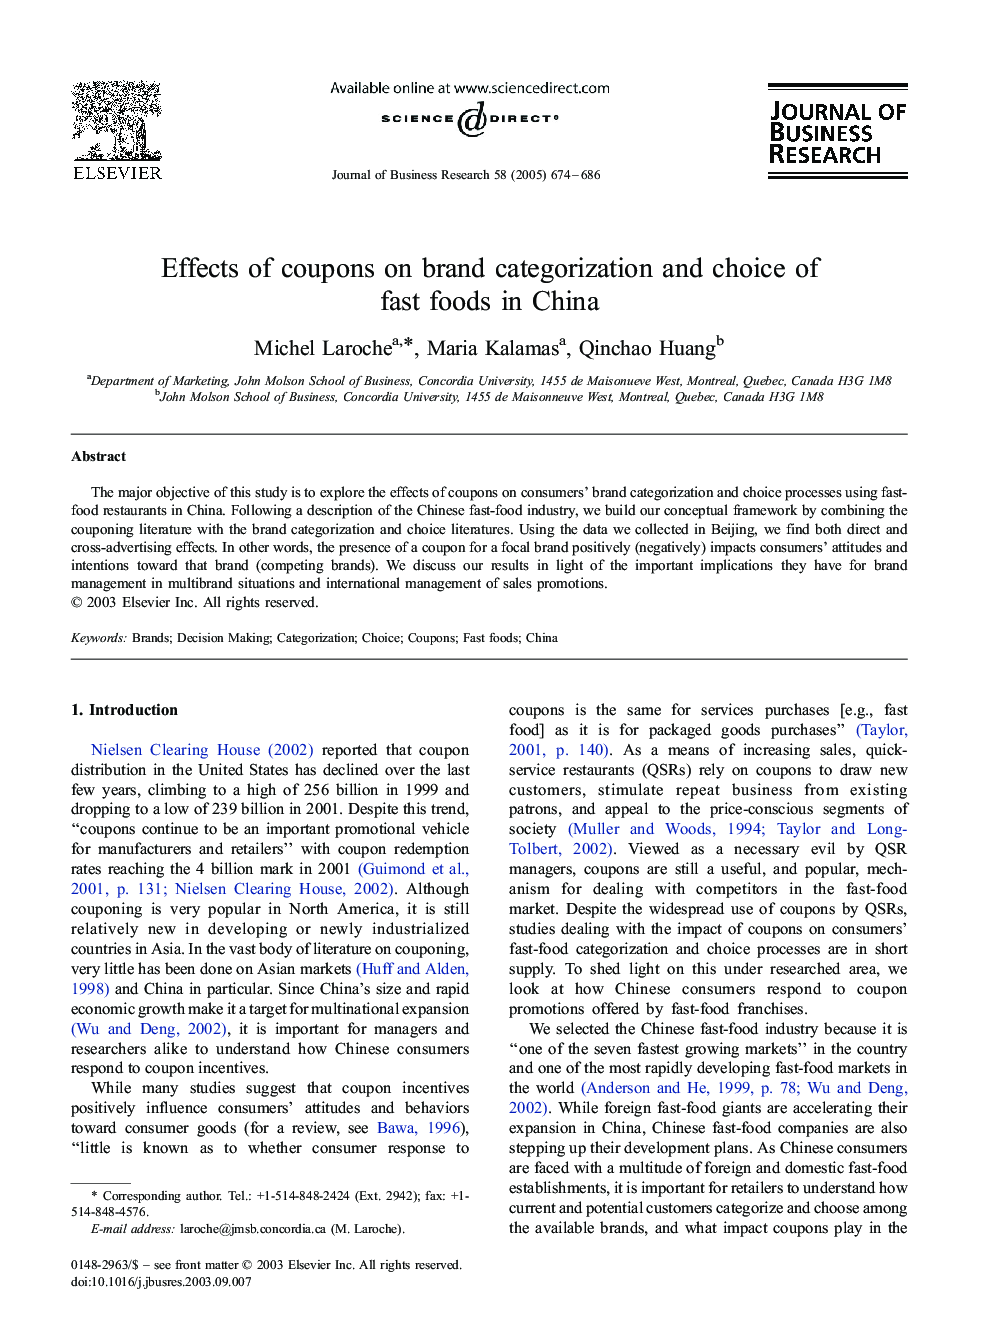 Effects of coupons on brand categorization and choice of fast foods in China